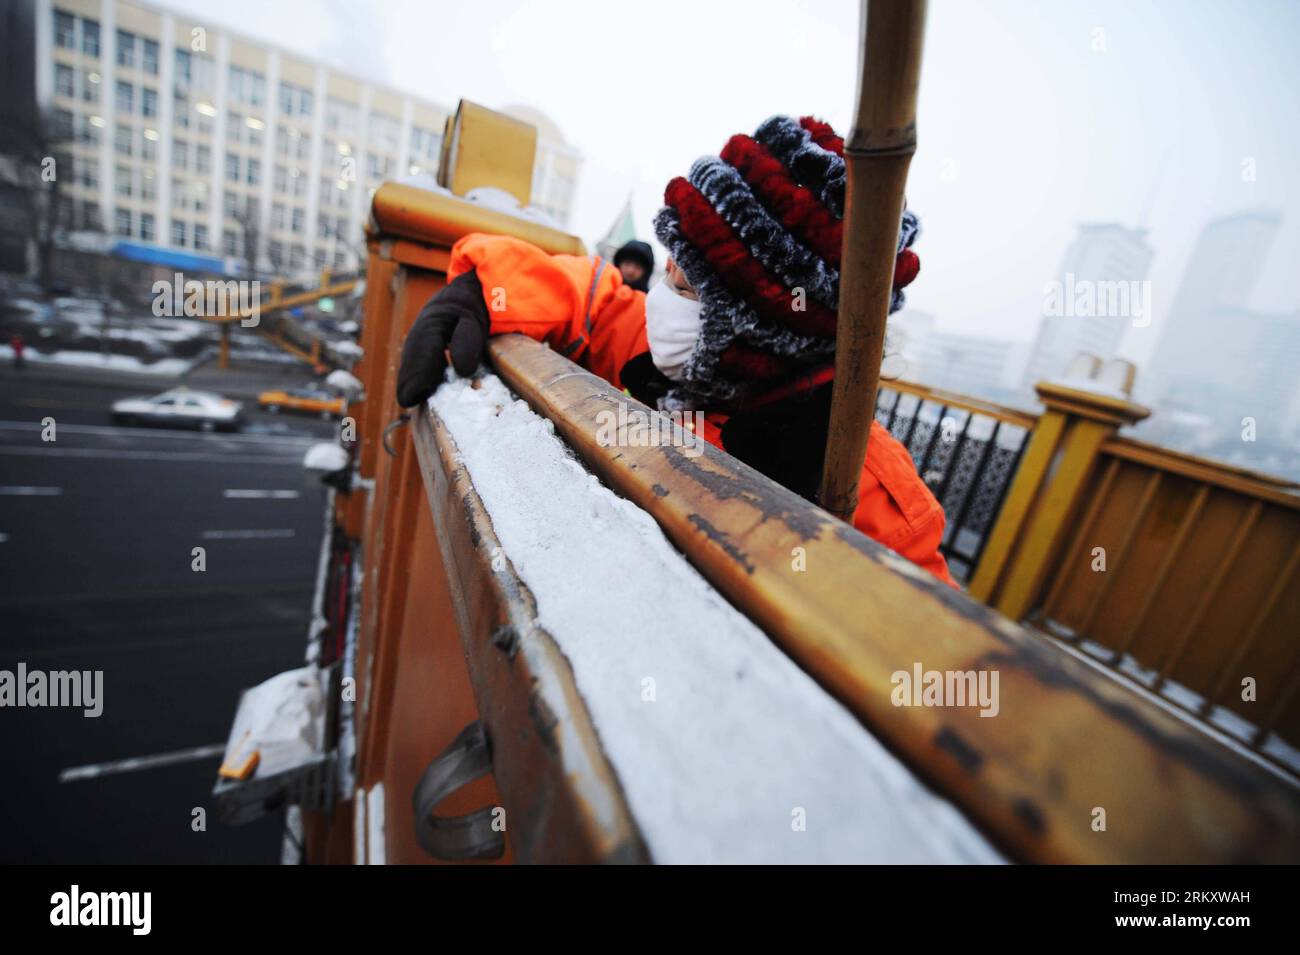 Bildnummer: 59095369  Datum: 16.01.2013  Copyright: imago/Xinhua HARBIN, Jan. 16, 2013 (Xinhua) -- Sanitation worker Yang Weixia picks up a cigarette end from a bridge handrail in Harbin, capital of northeast China s Heilongjiang Province, Jan. 16, 2013. Yang Weixia, 48, is an ordinary sanitation worker living in Harbin, a city known for its bitterly cold winters and often called the Ice City. For 32 years, Yang has never stopped sweating away at her work, though she often gets up at three o clock every morning and will not go back home until 9 in the evening in the cold winter. There are more Stock Photo